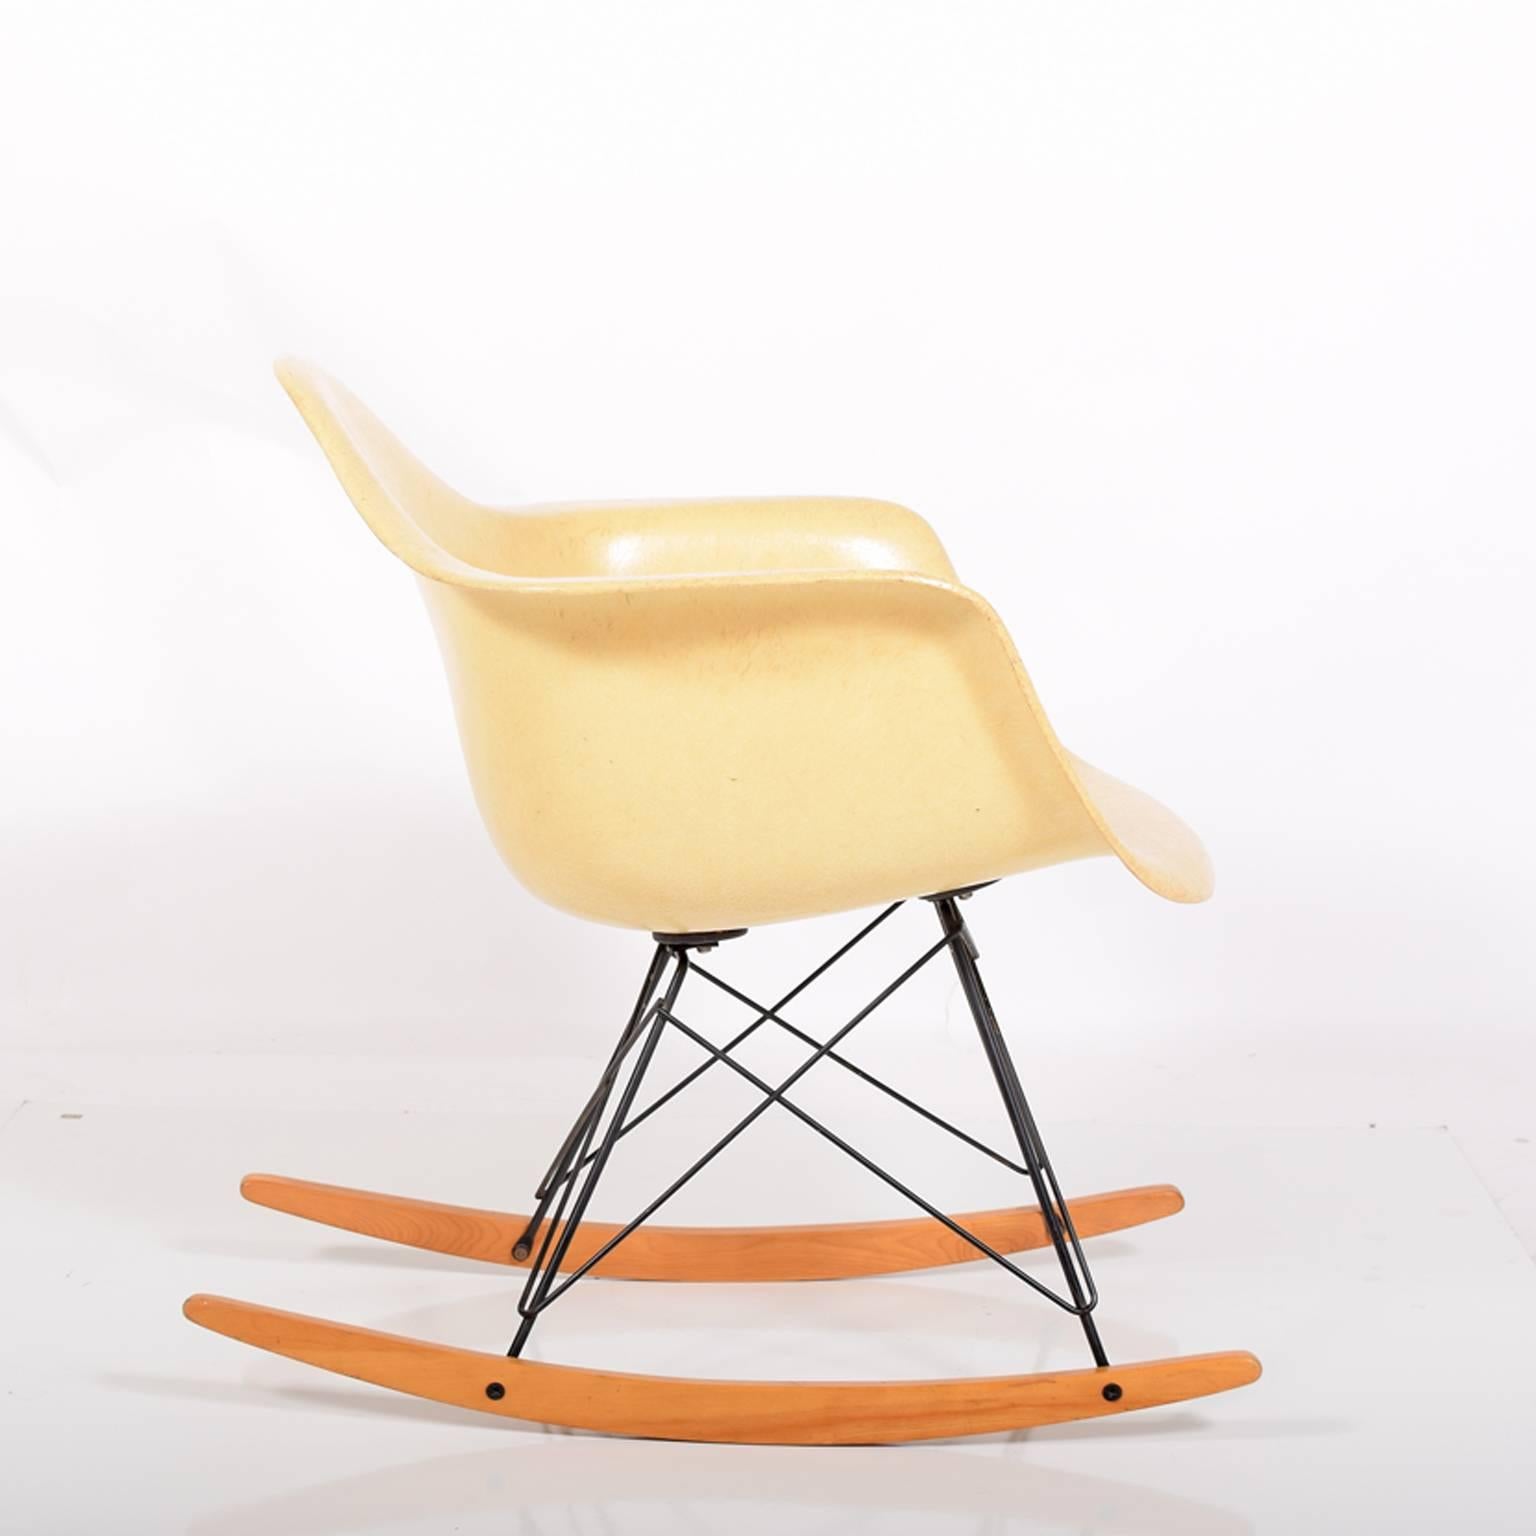 Original fiberglass armed shell on black wire base with birch rocker struts and large rubber mounts. Marked on bottom, Herman Miller. The chair was on carpet most of its life.